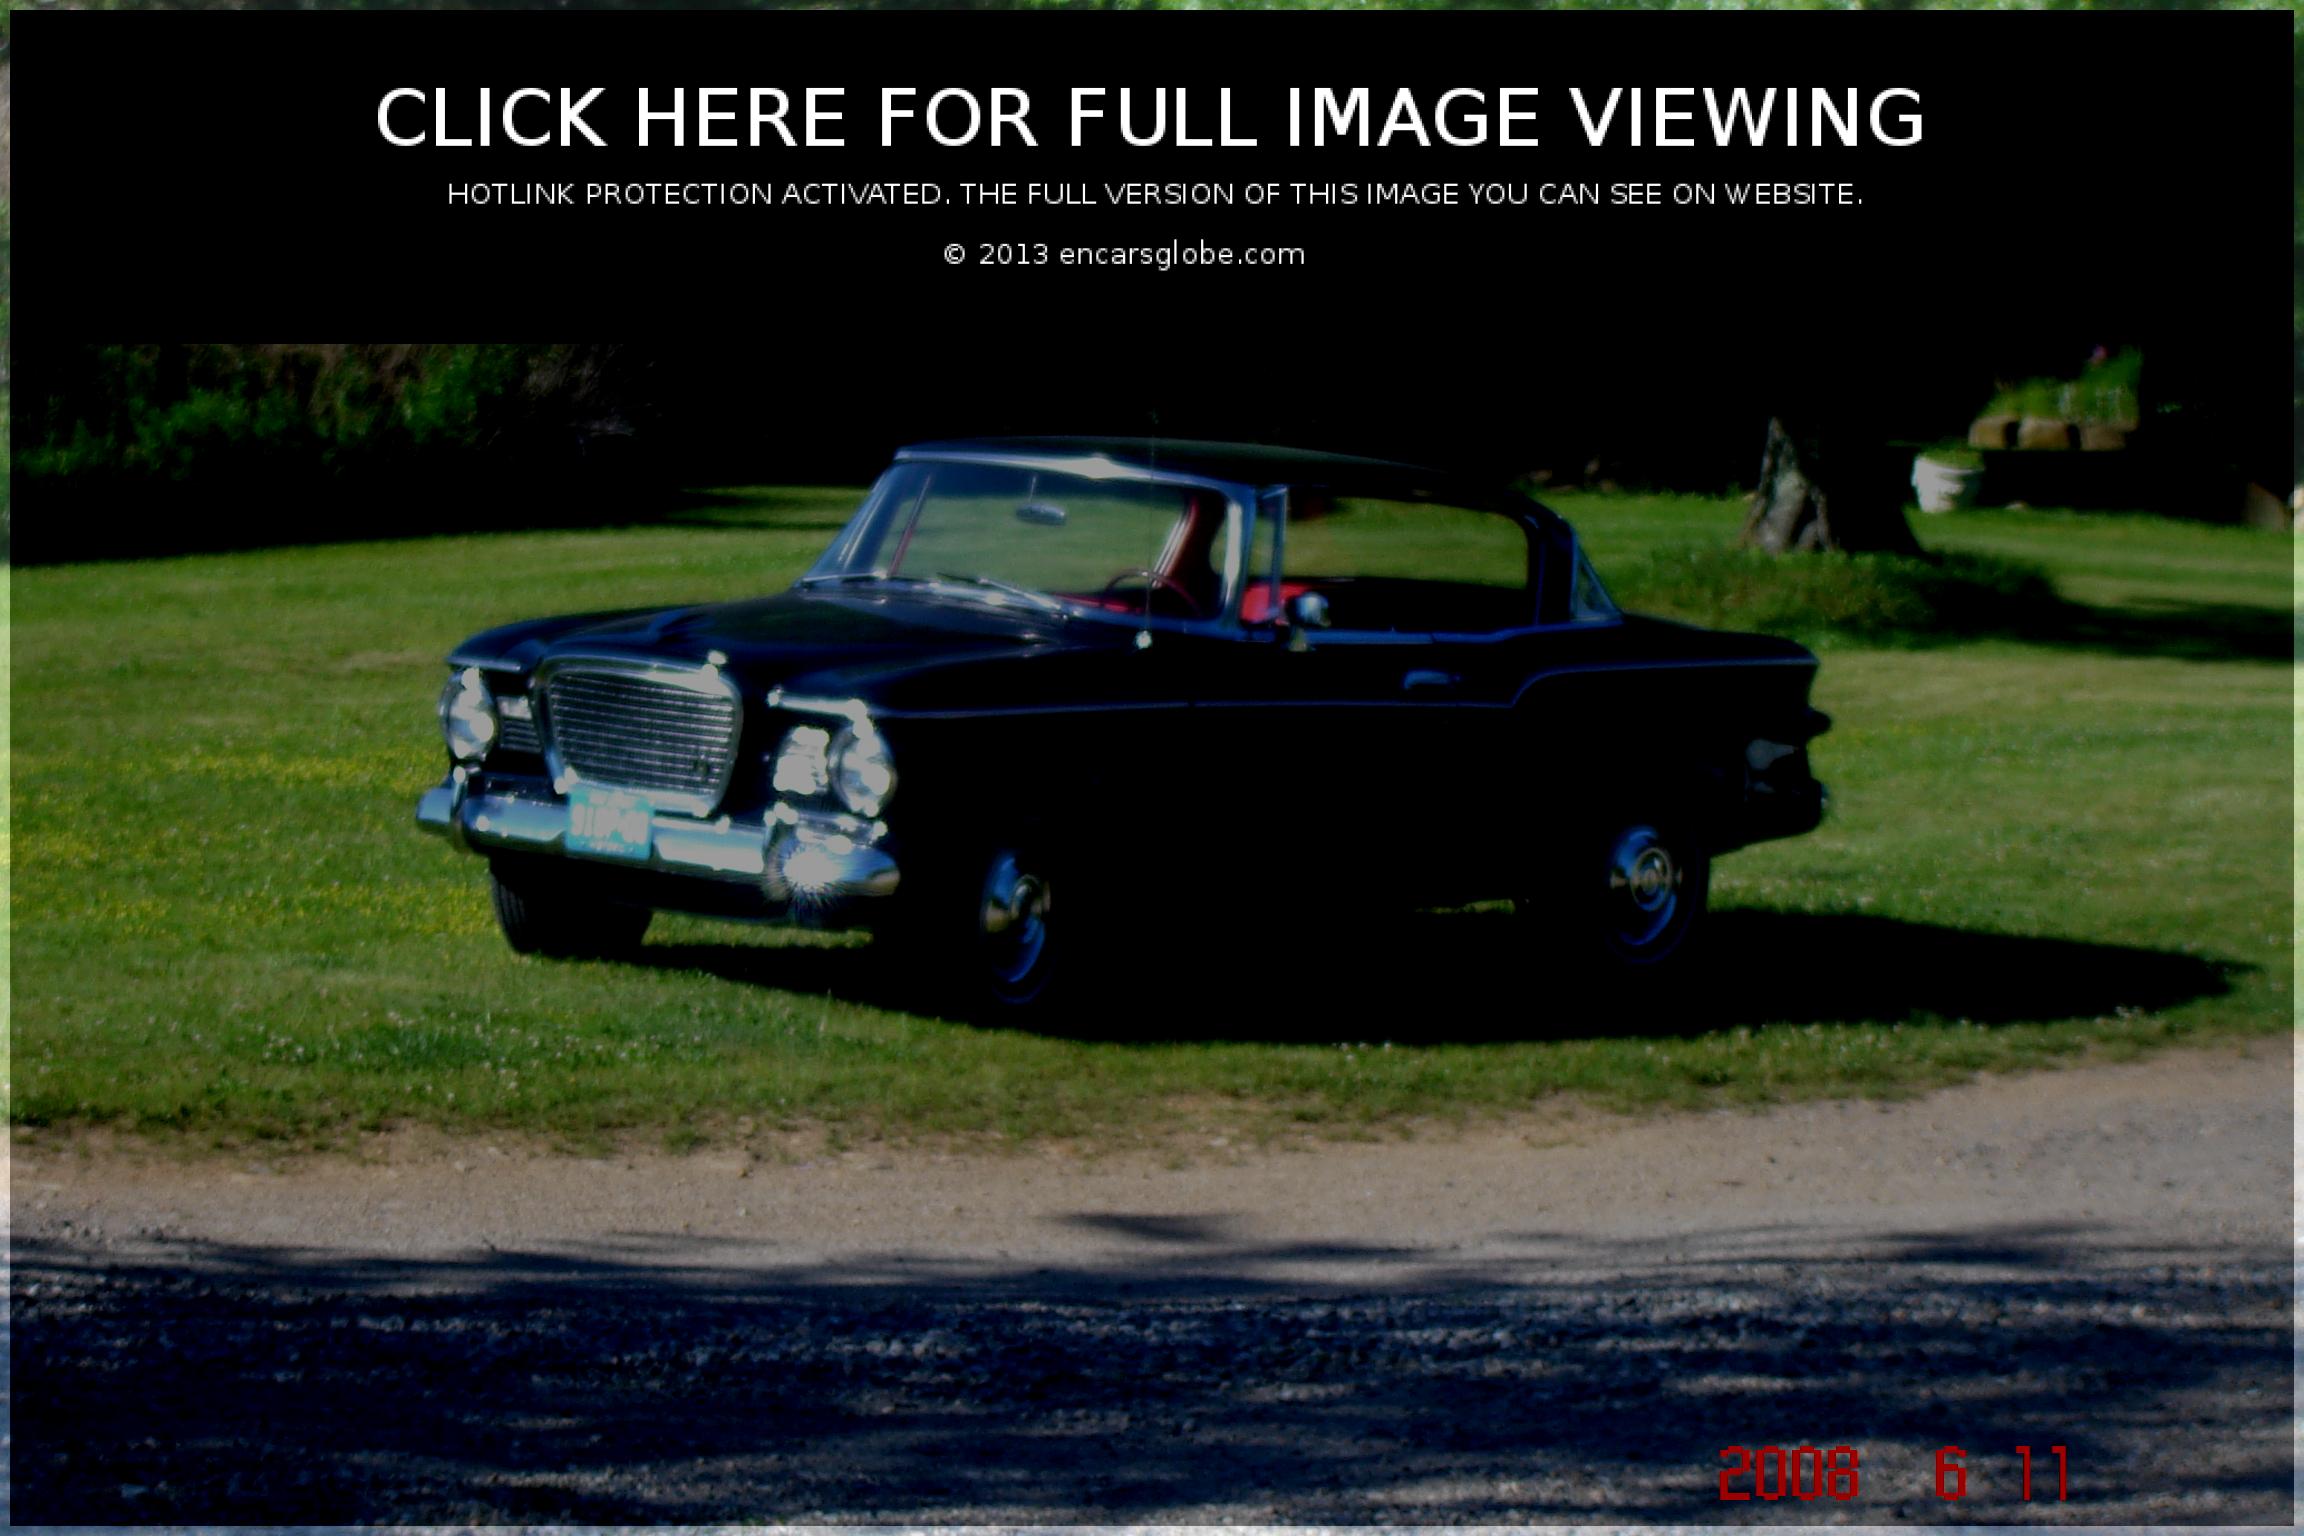 Studebaker Lark Eight Photo Gallery: Photo #06 out of 12, Image ...